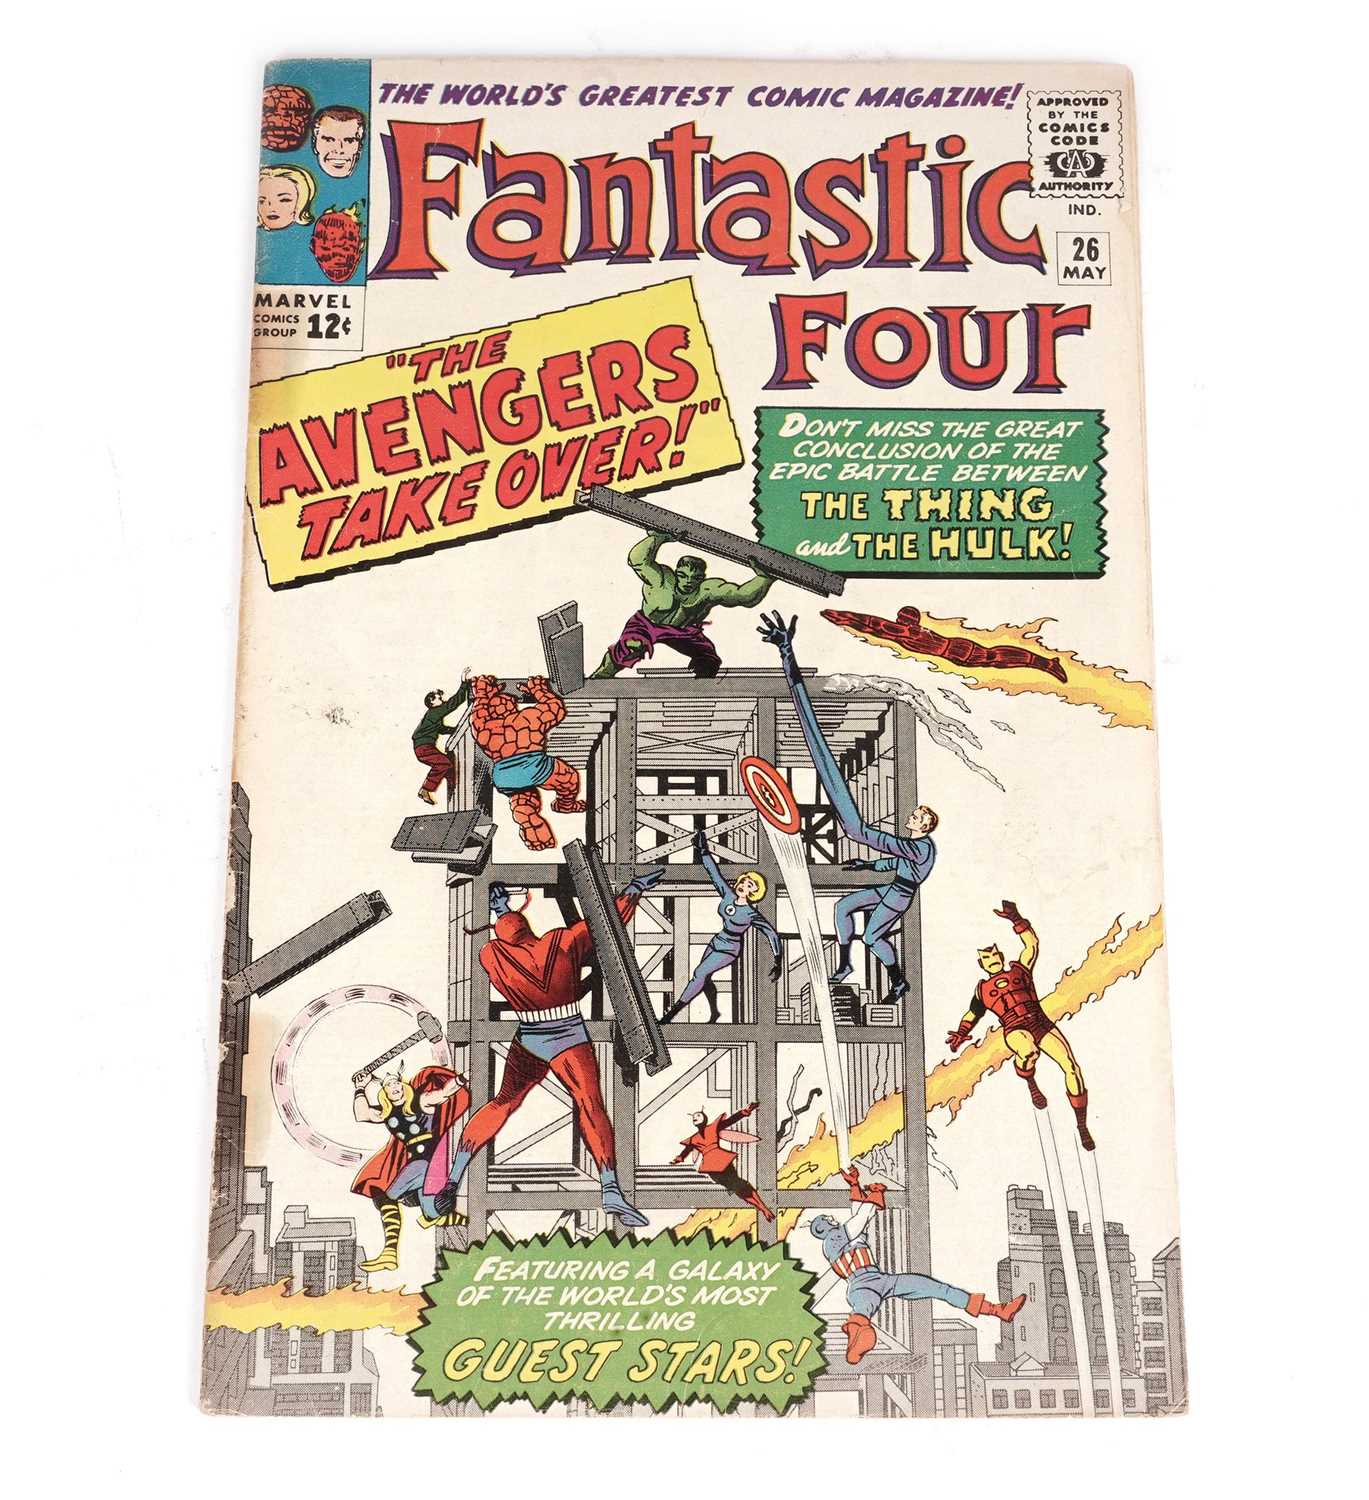 The Fantastic Four No. 26 by Marvel Comics